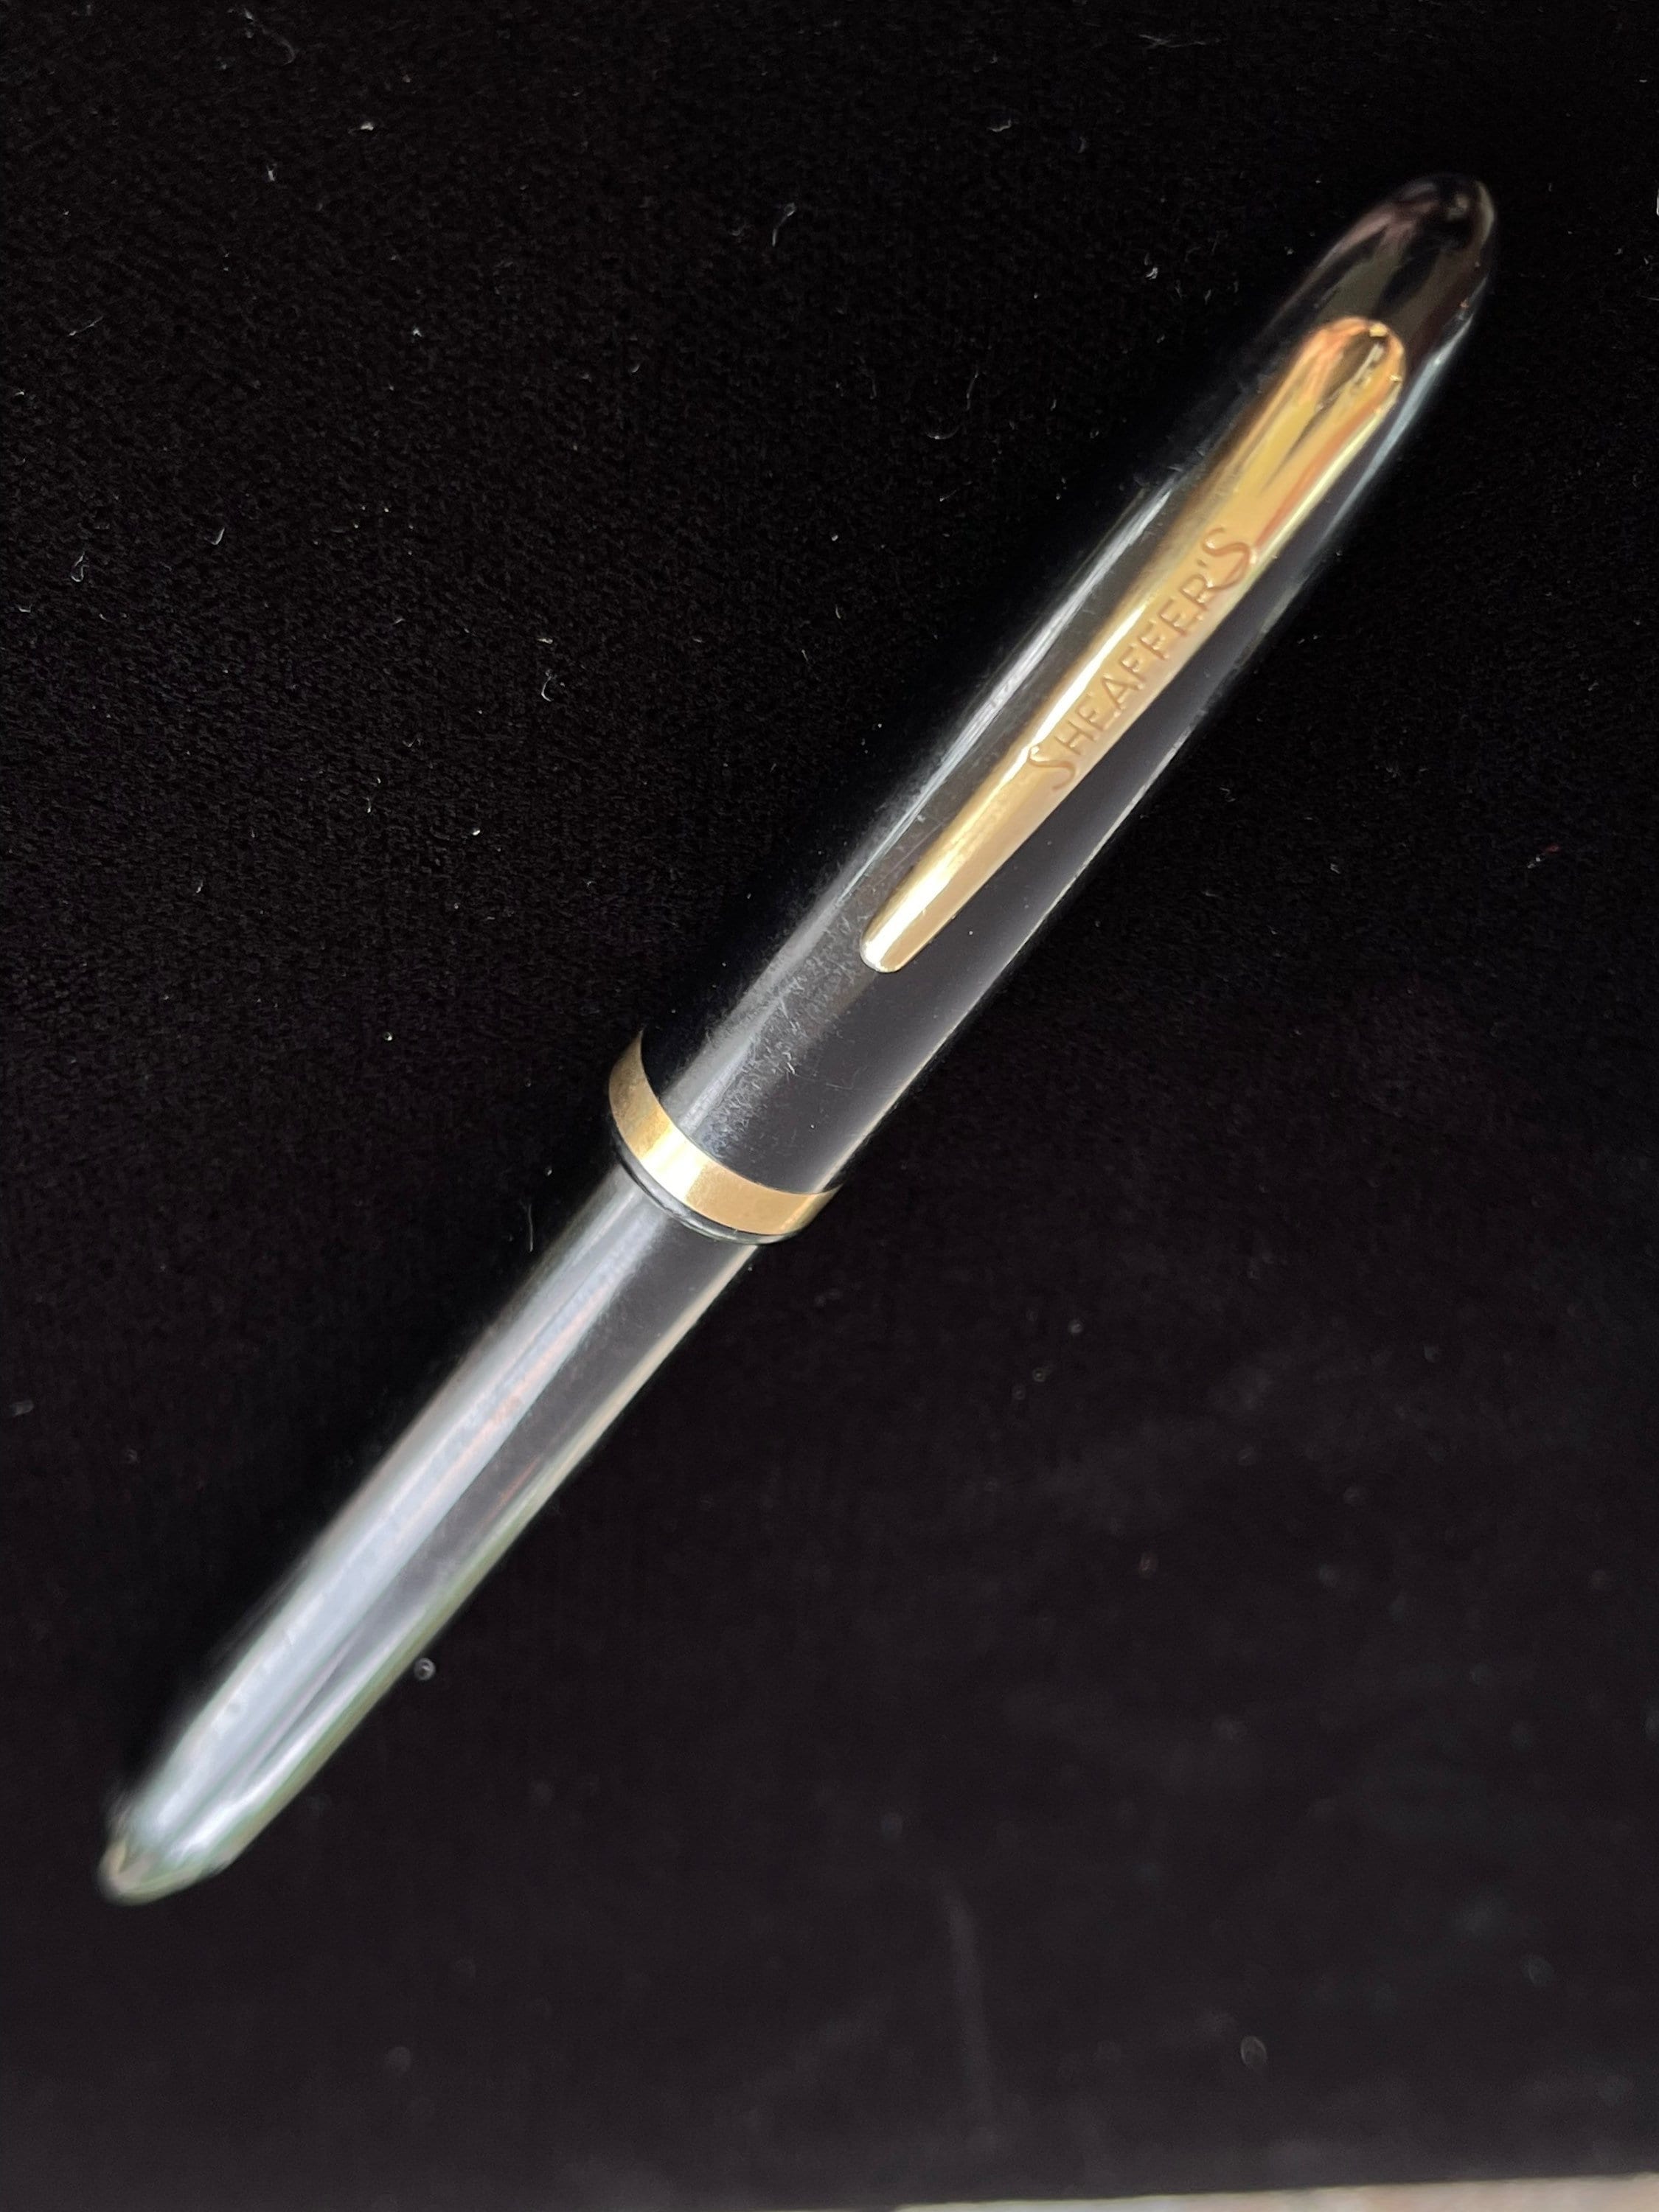 Vintage Fountain Pens: Lady Sheaffer Skripsert and Sheaffer Imperial - The  Well-Appointed Desk